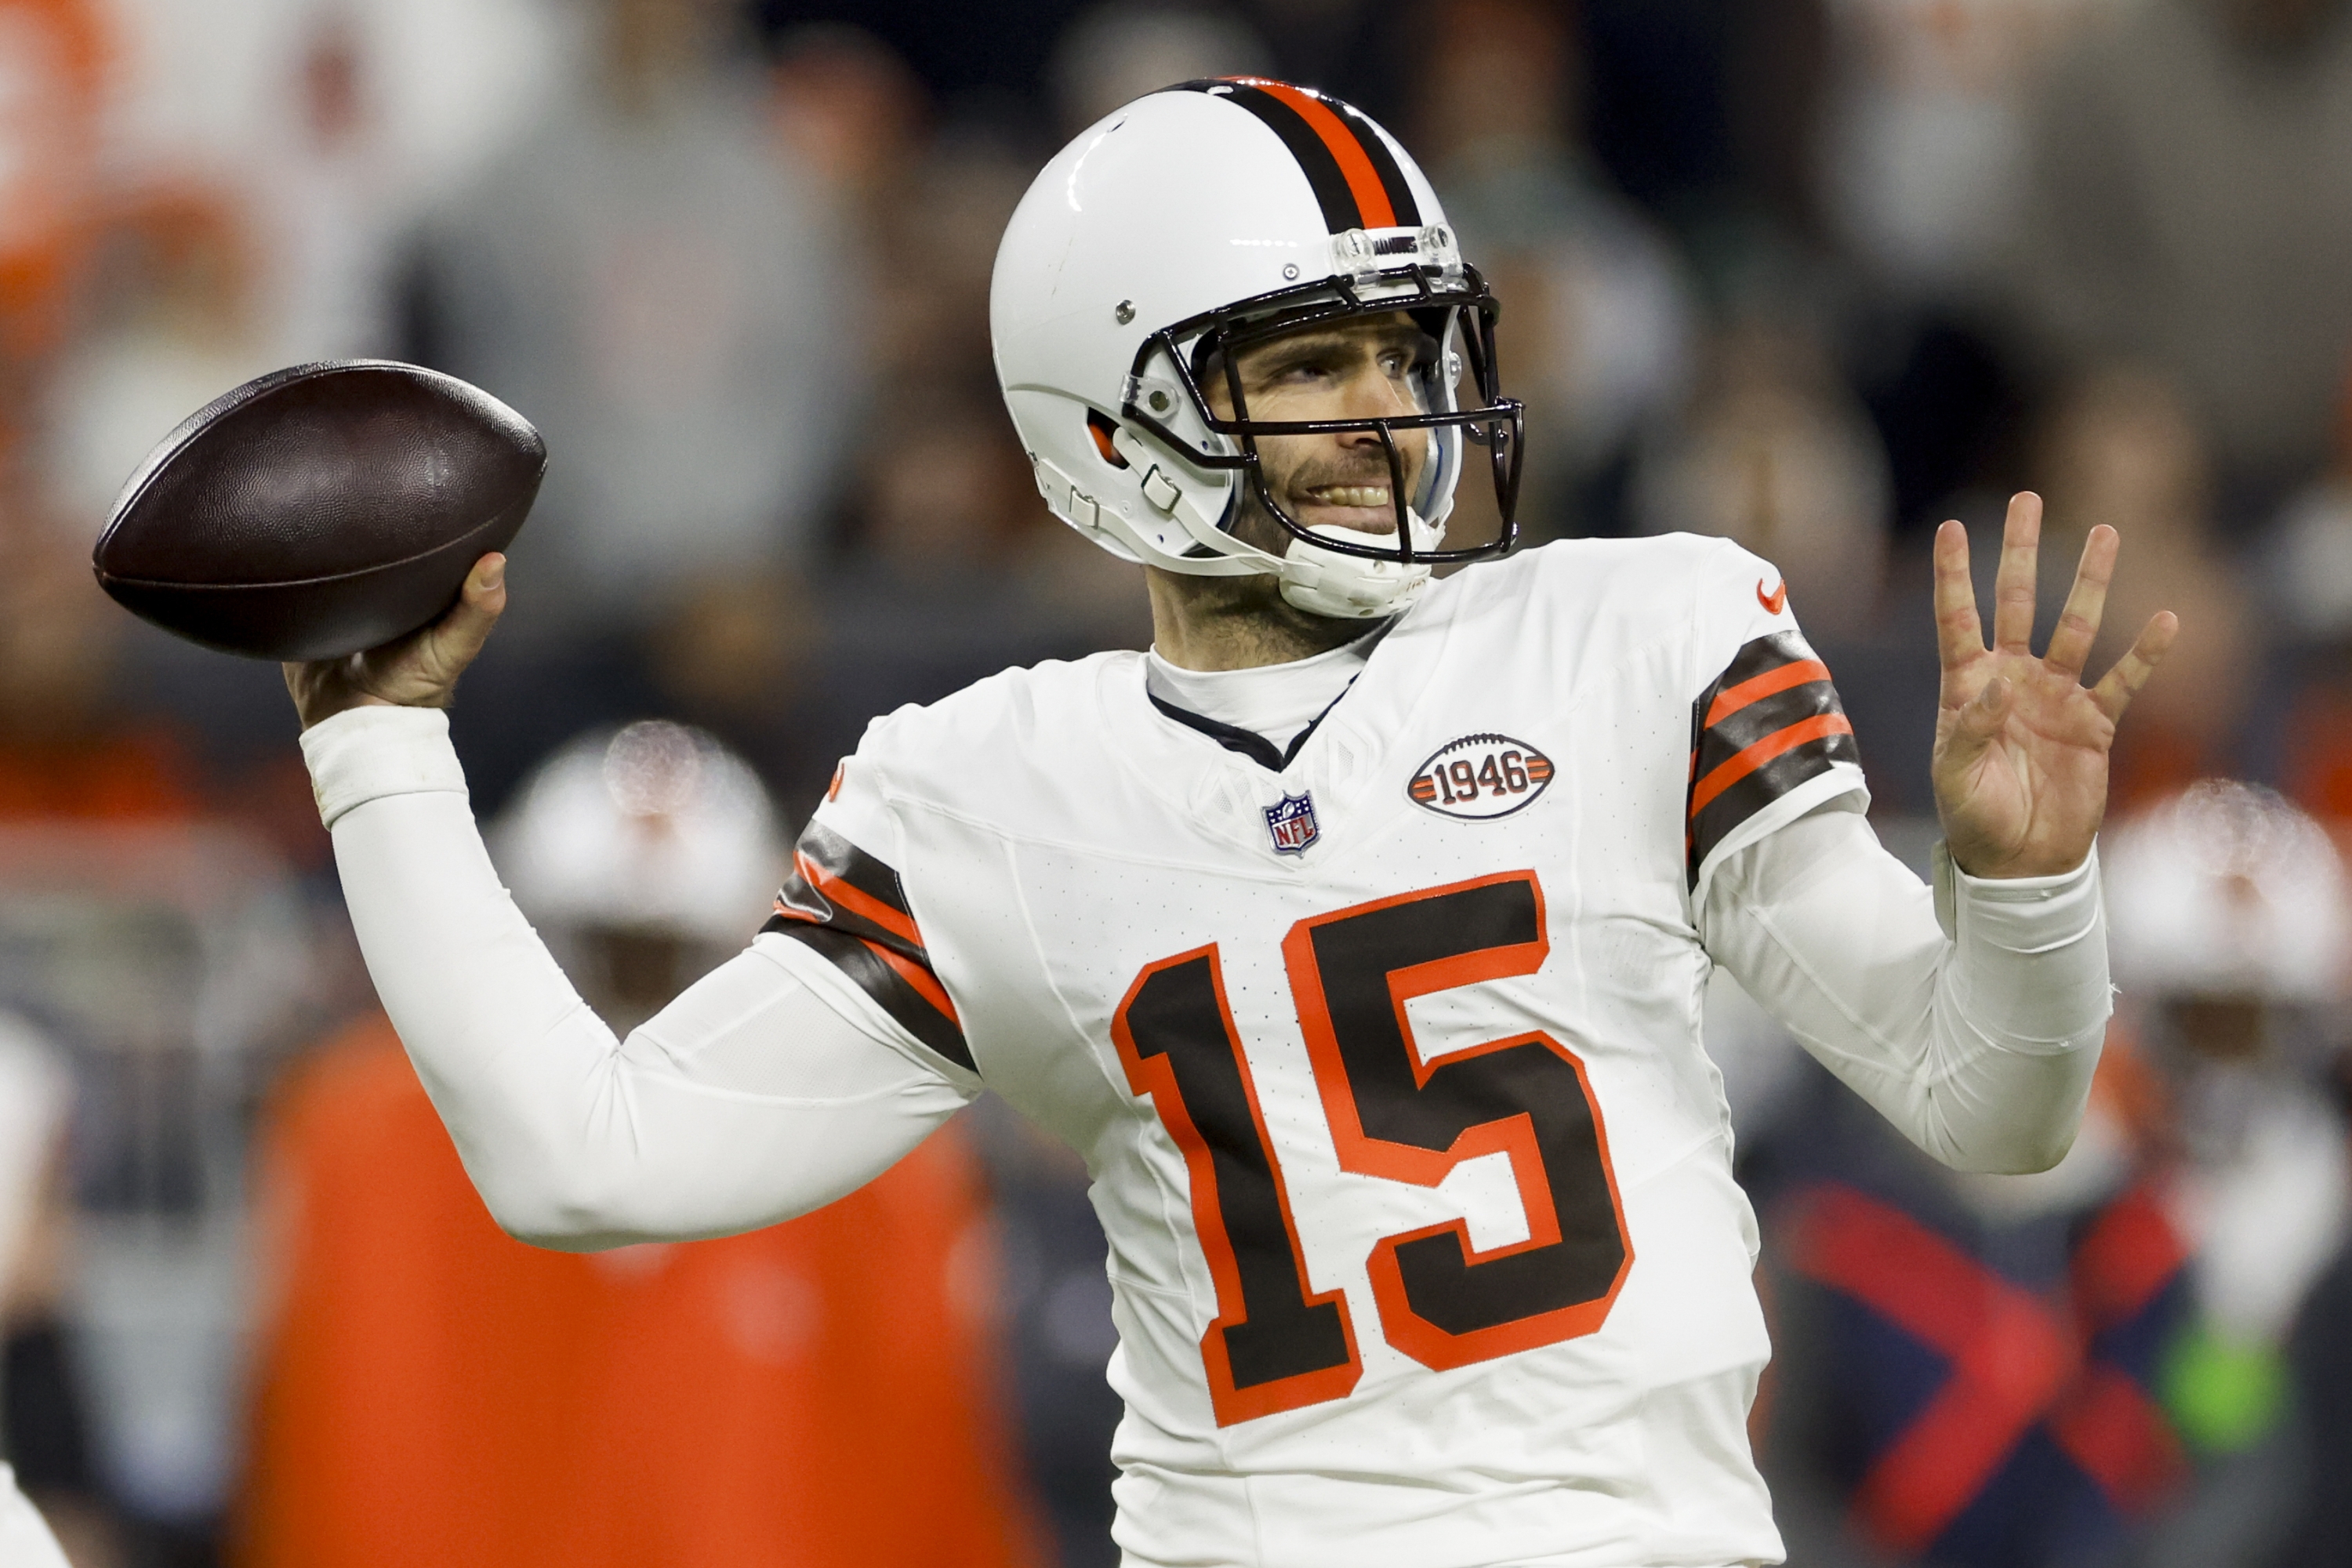 Cleveland Browns quarterback Joe Flacco passes against the New York Jets during the first half of an NFL football game Thursday, Dec. 28, 2023, in Cleveland. (AP Photo/Ron Schwane)